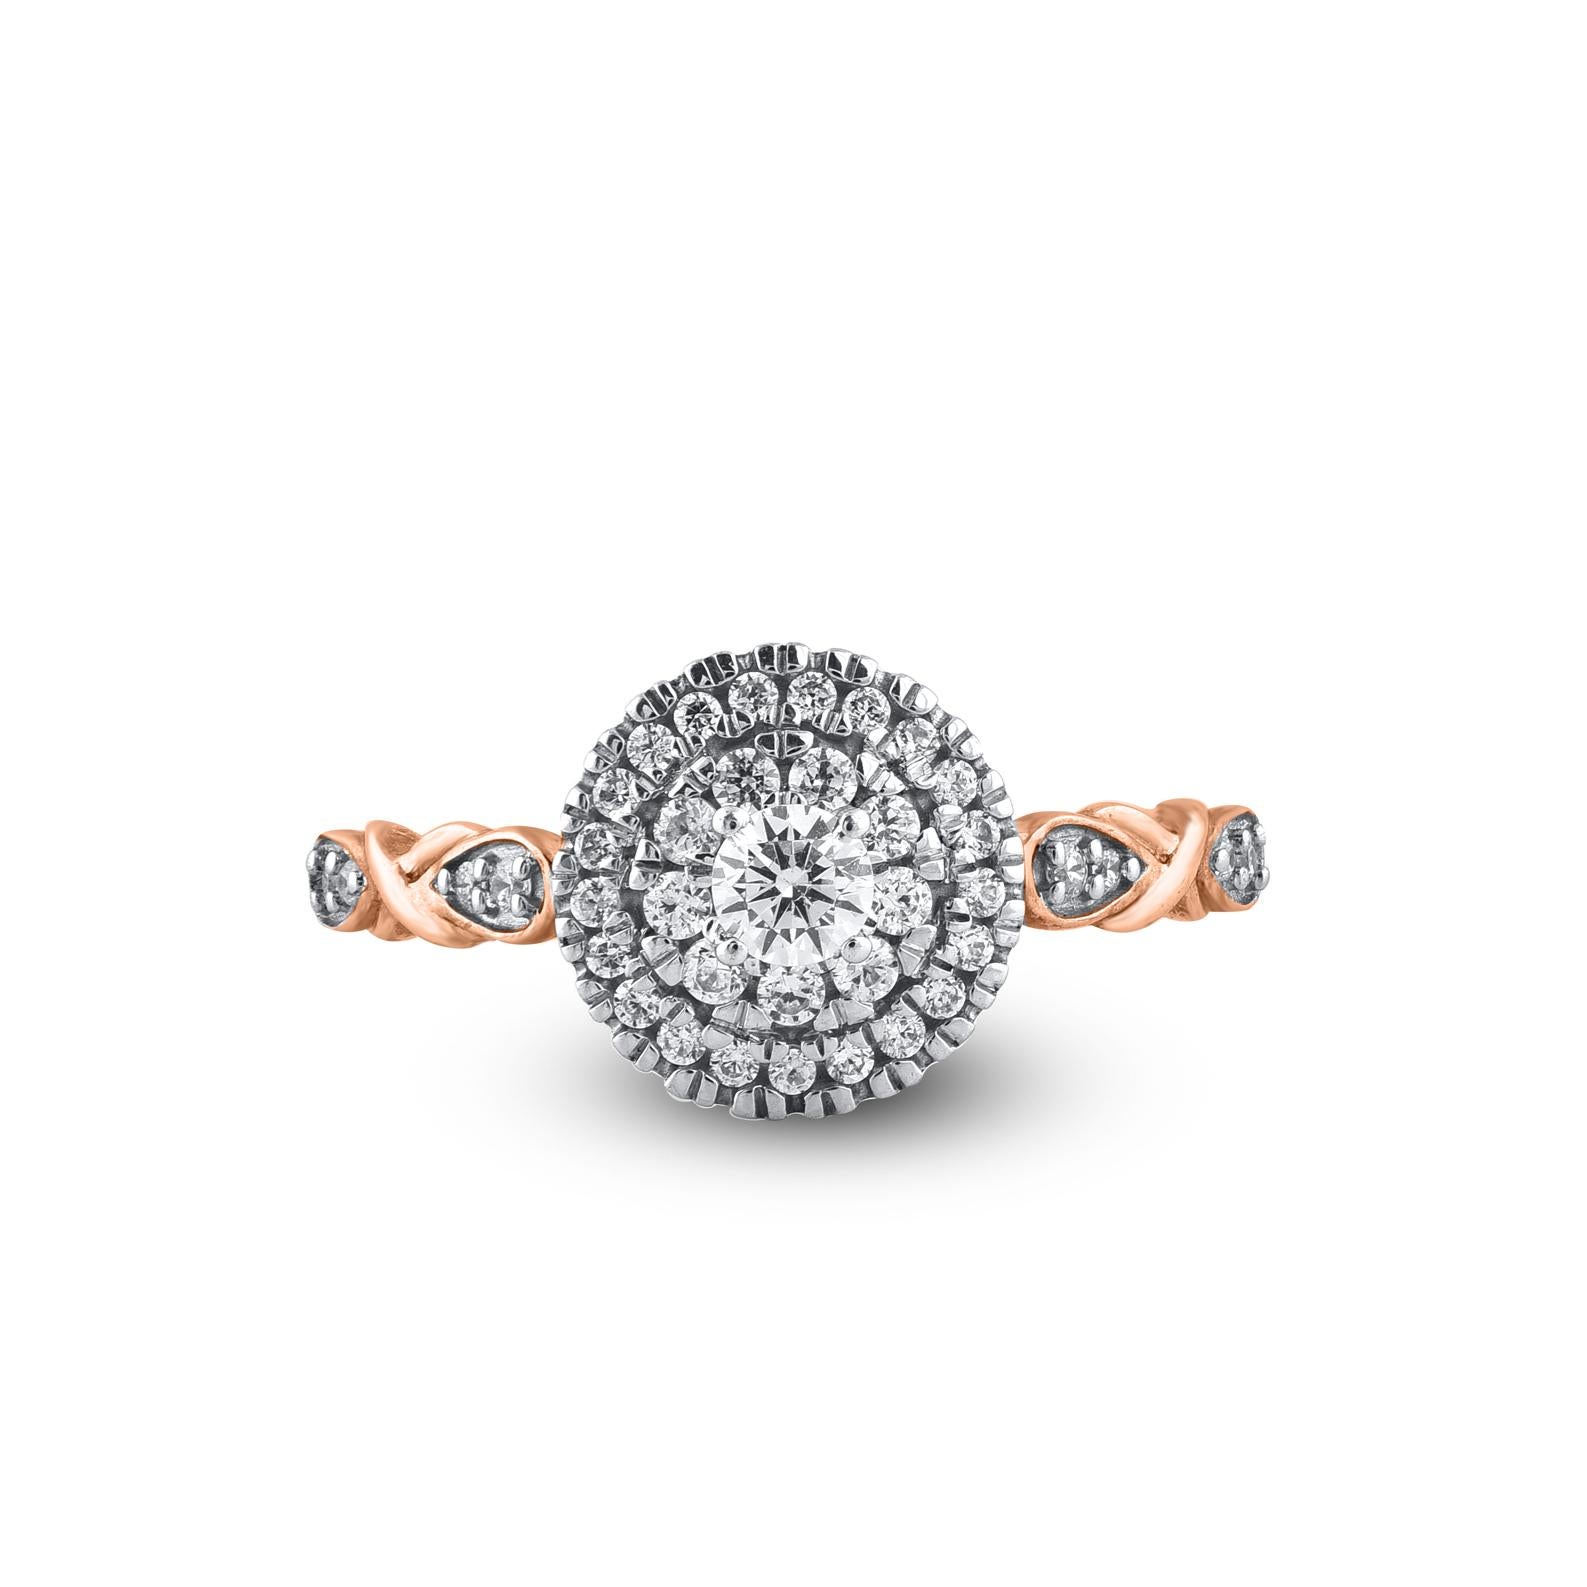 Truly exquisite, this diamond wedding ring is sure to be admired for the inherent classic beauty and elegance within its design. These ring is crafted in 14KT rose gold, and studded with 39 single cut and brilliant cut natural diamonds in prong